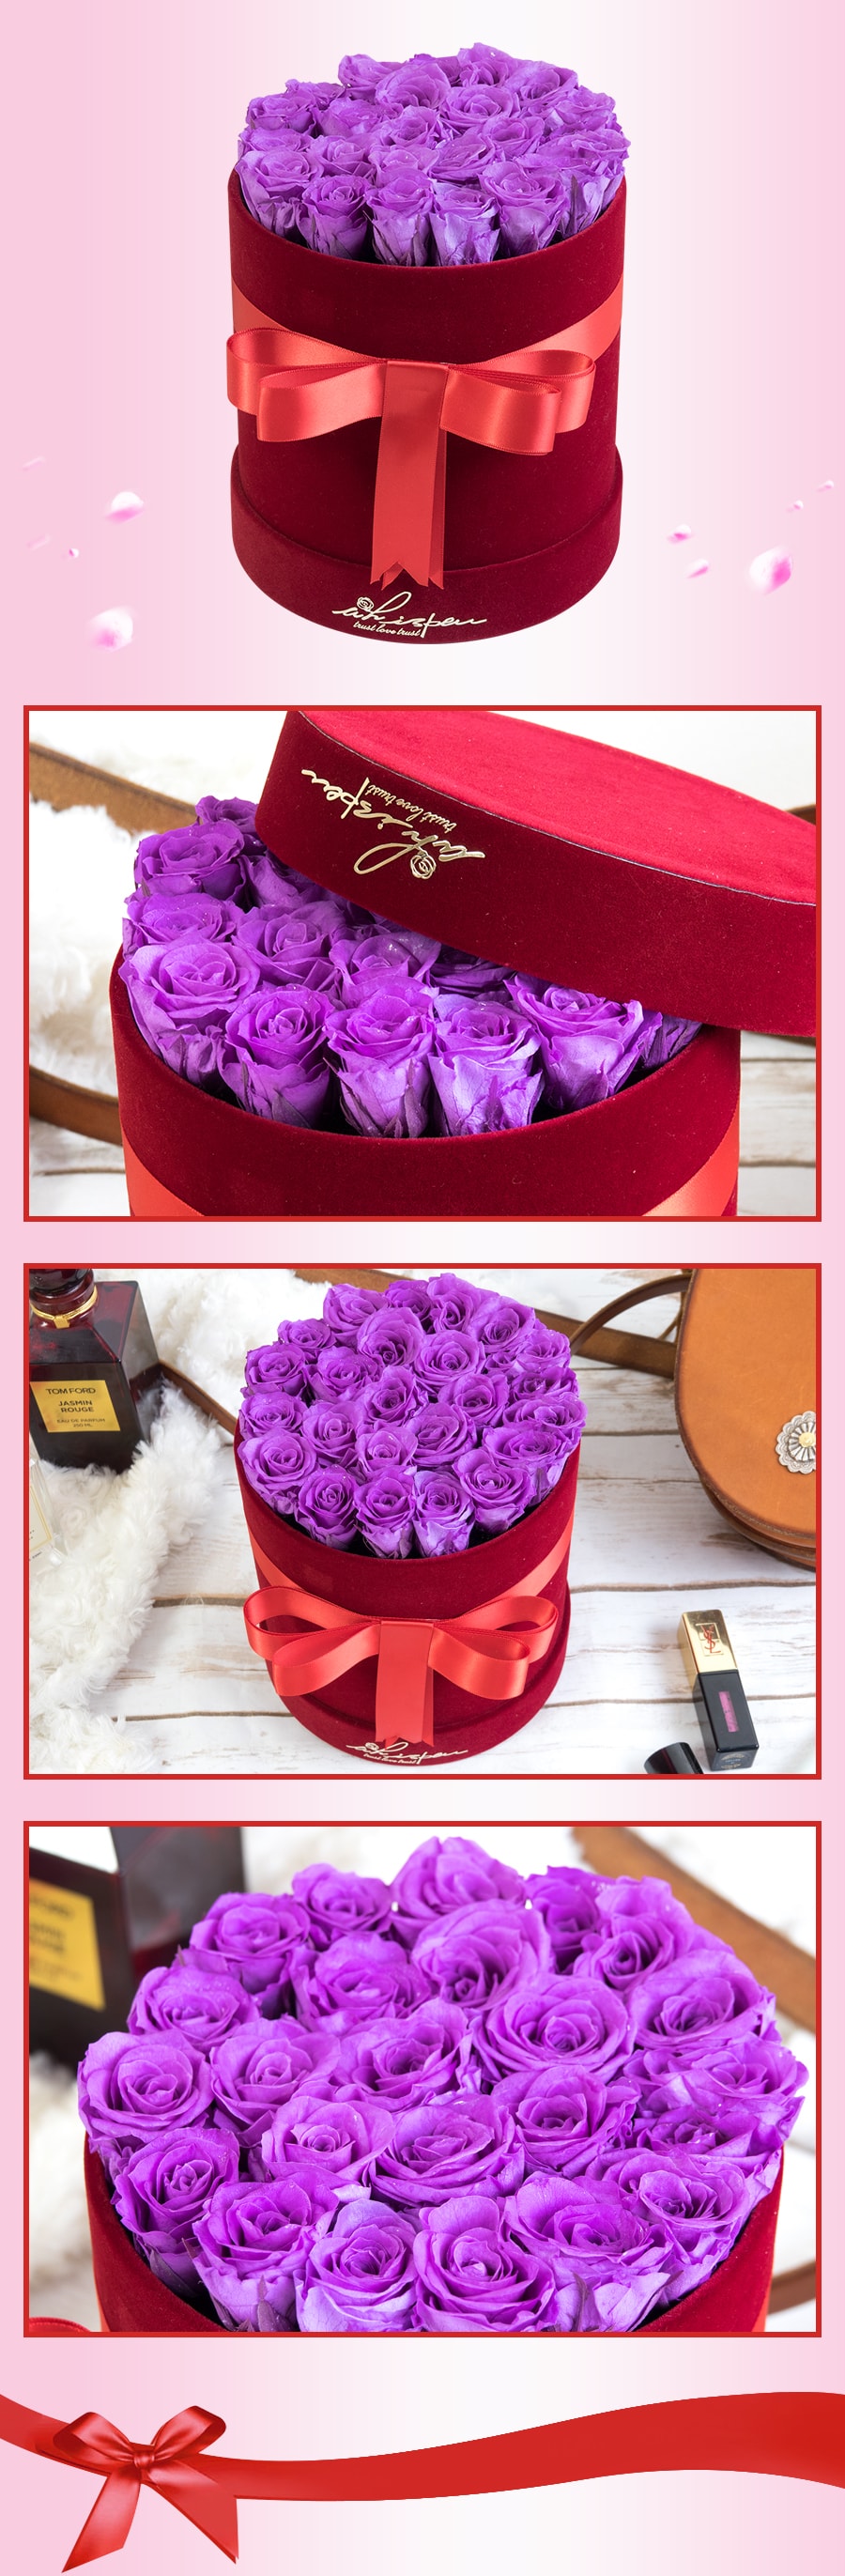 whisper bouquet preserved roses Red wine round box (fuchsia roses)